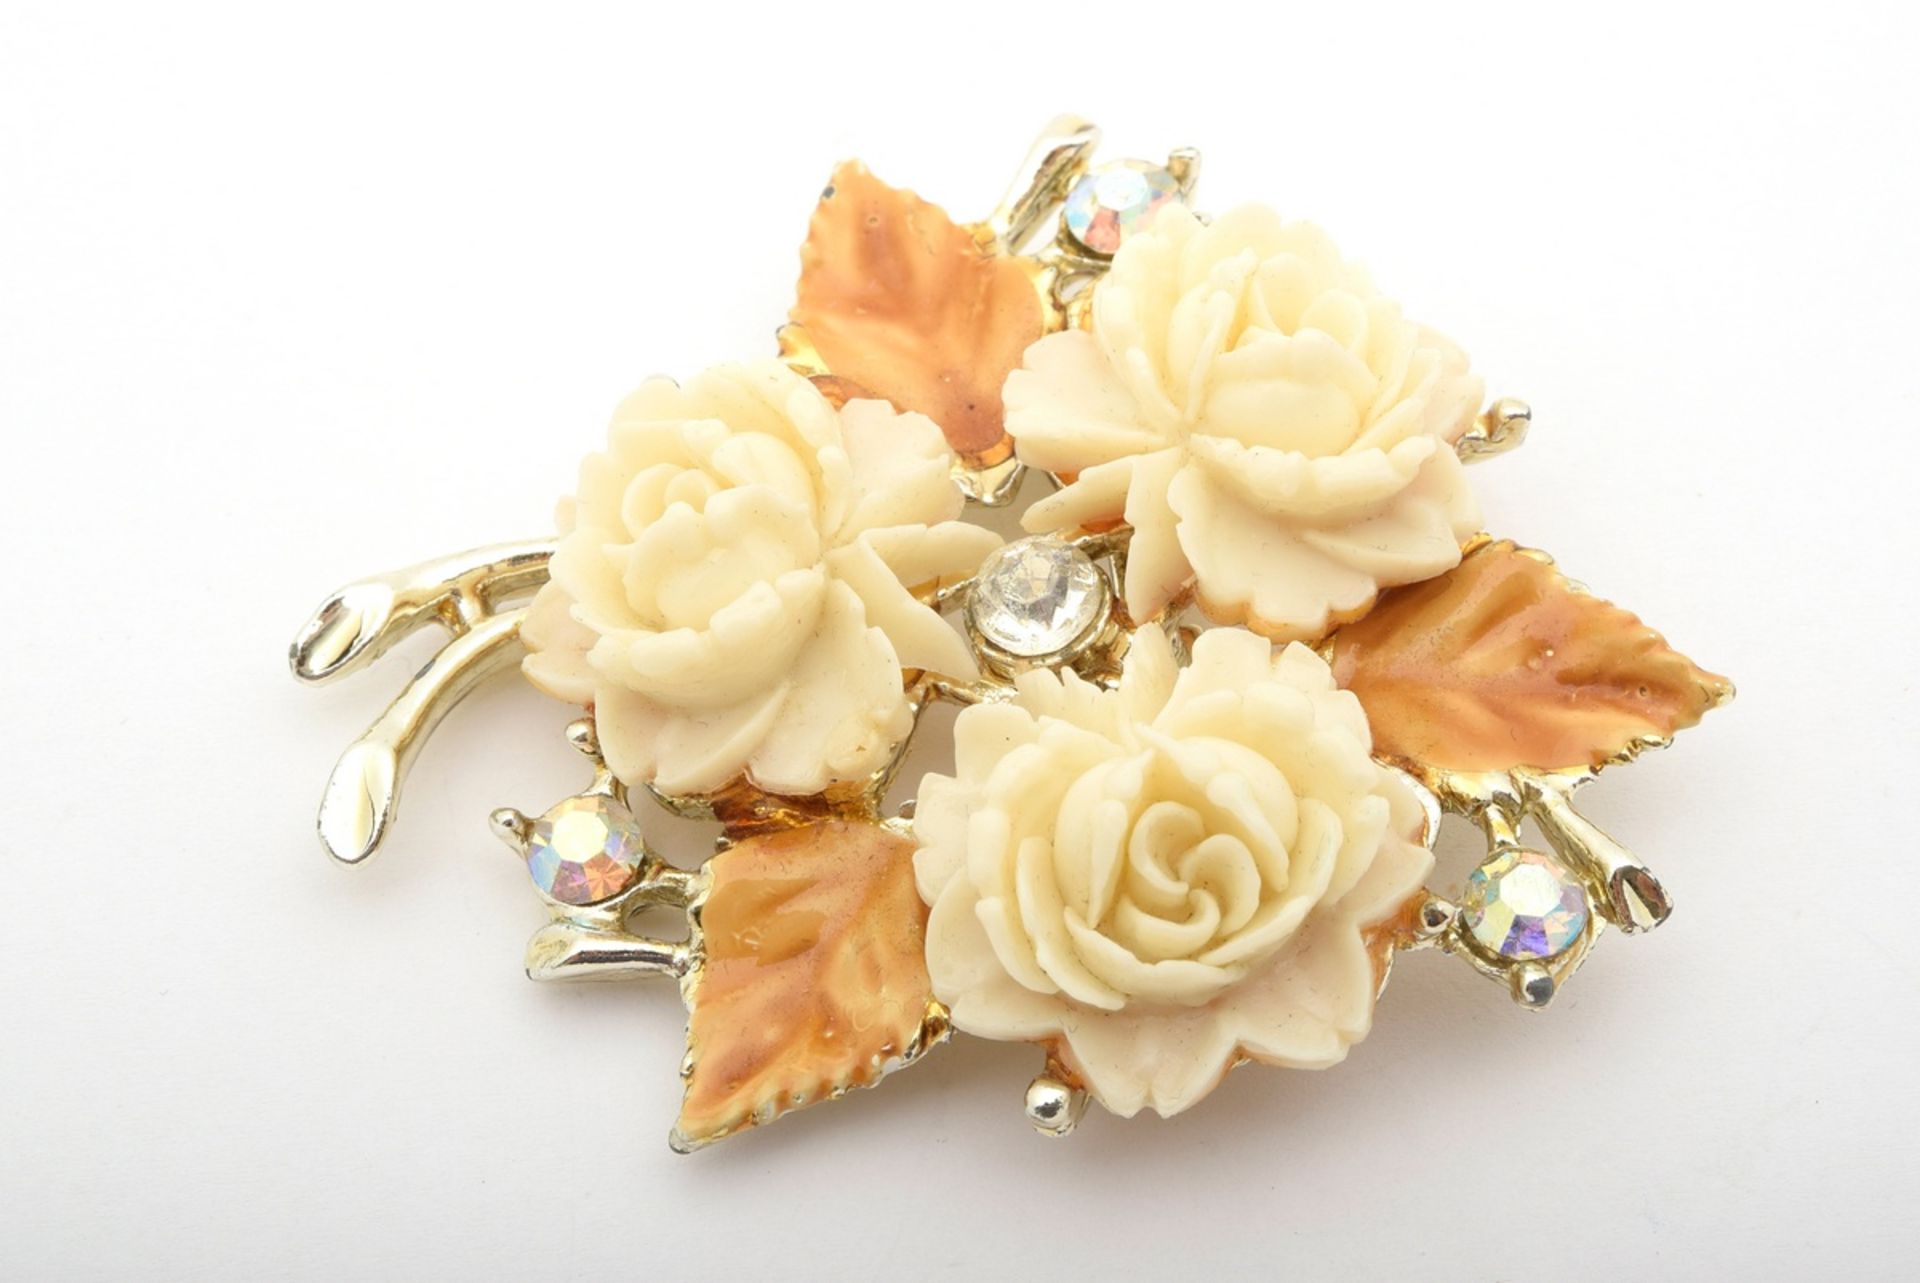 8 pieces of gold plated floral costume jewellery with plastic elements, rhinestones, glass cabochon - Image 6 of 15